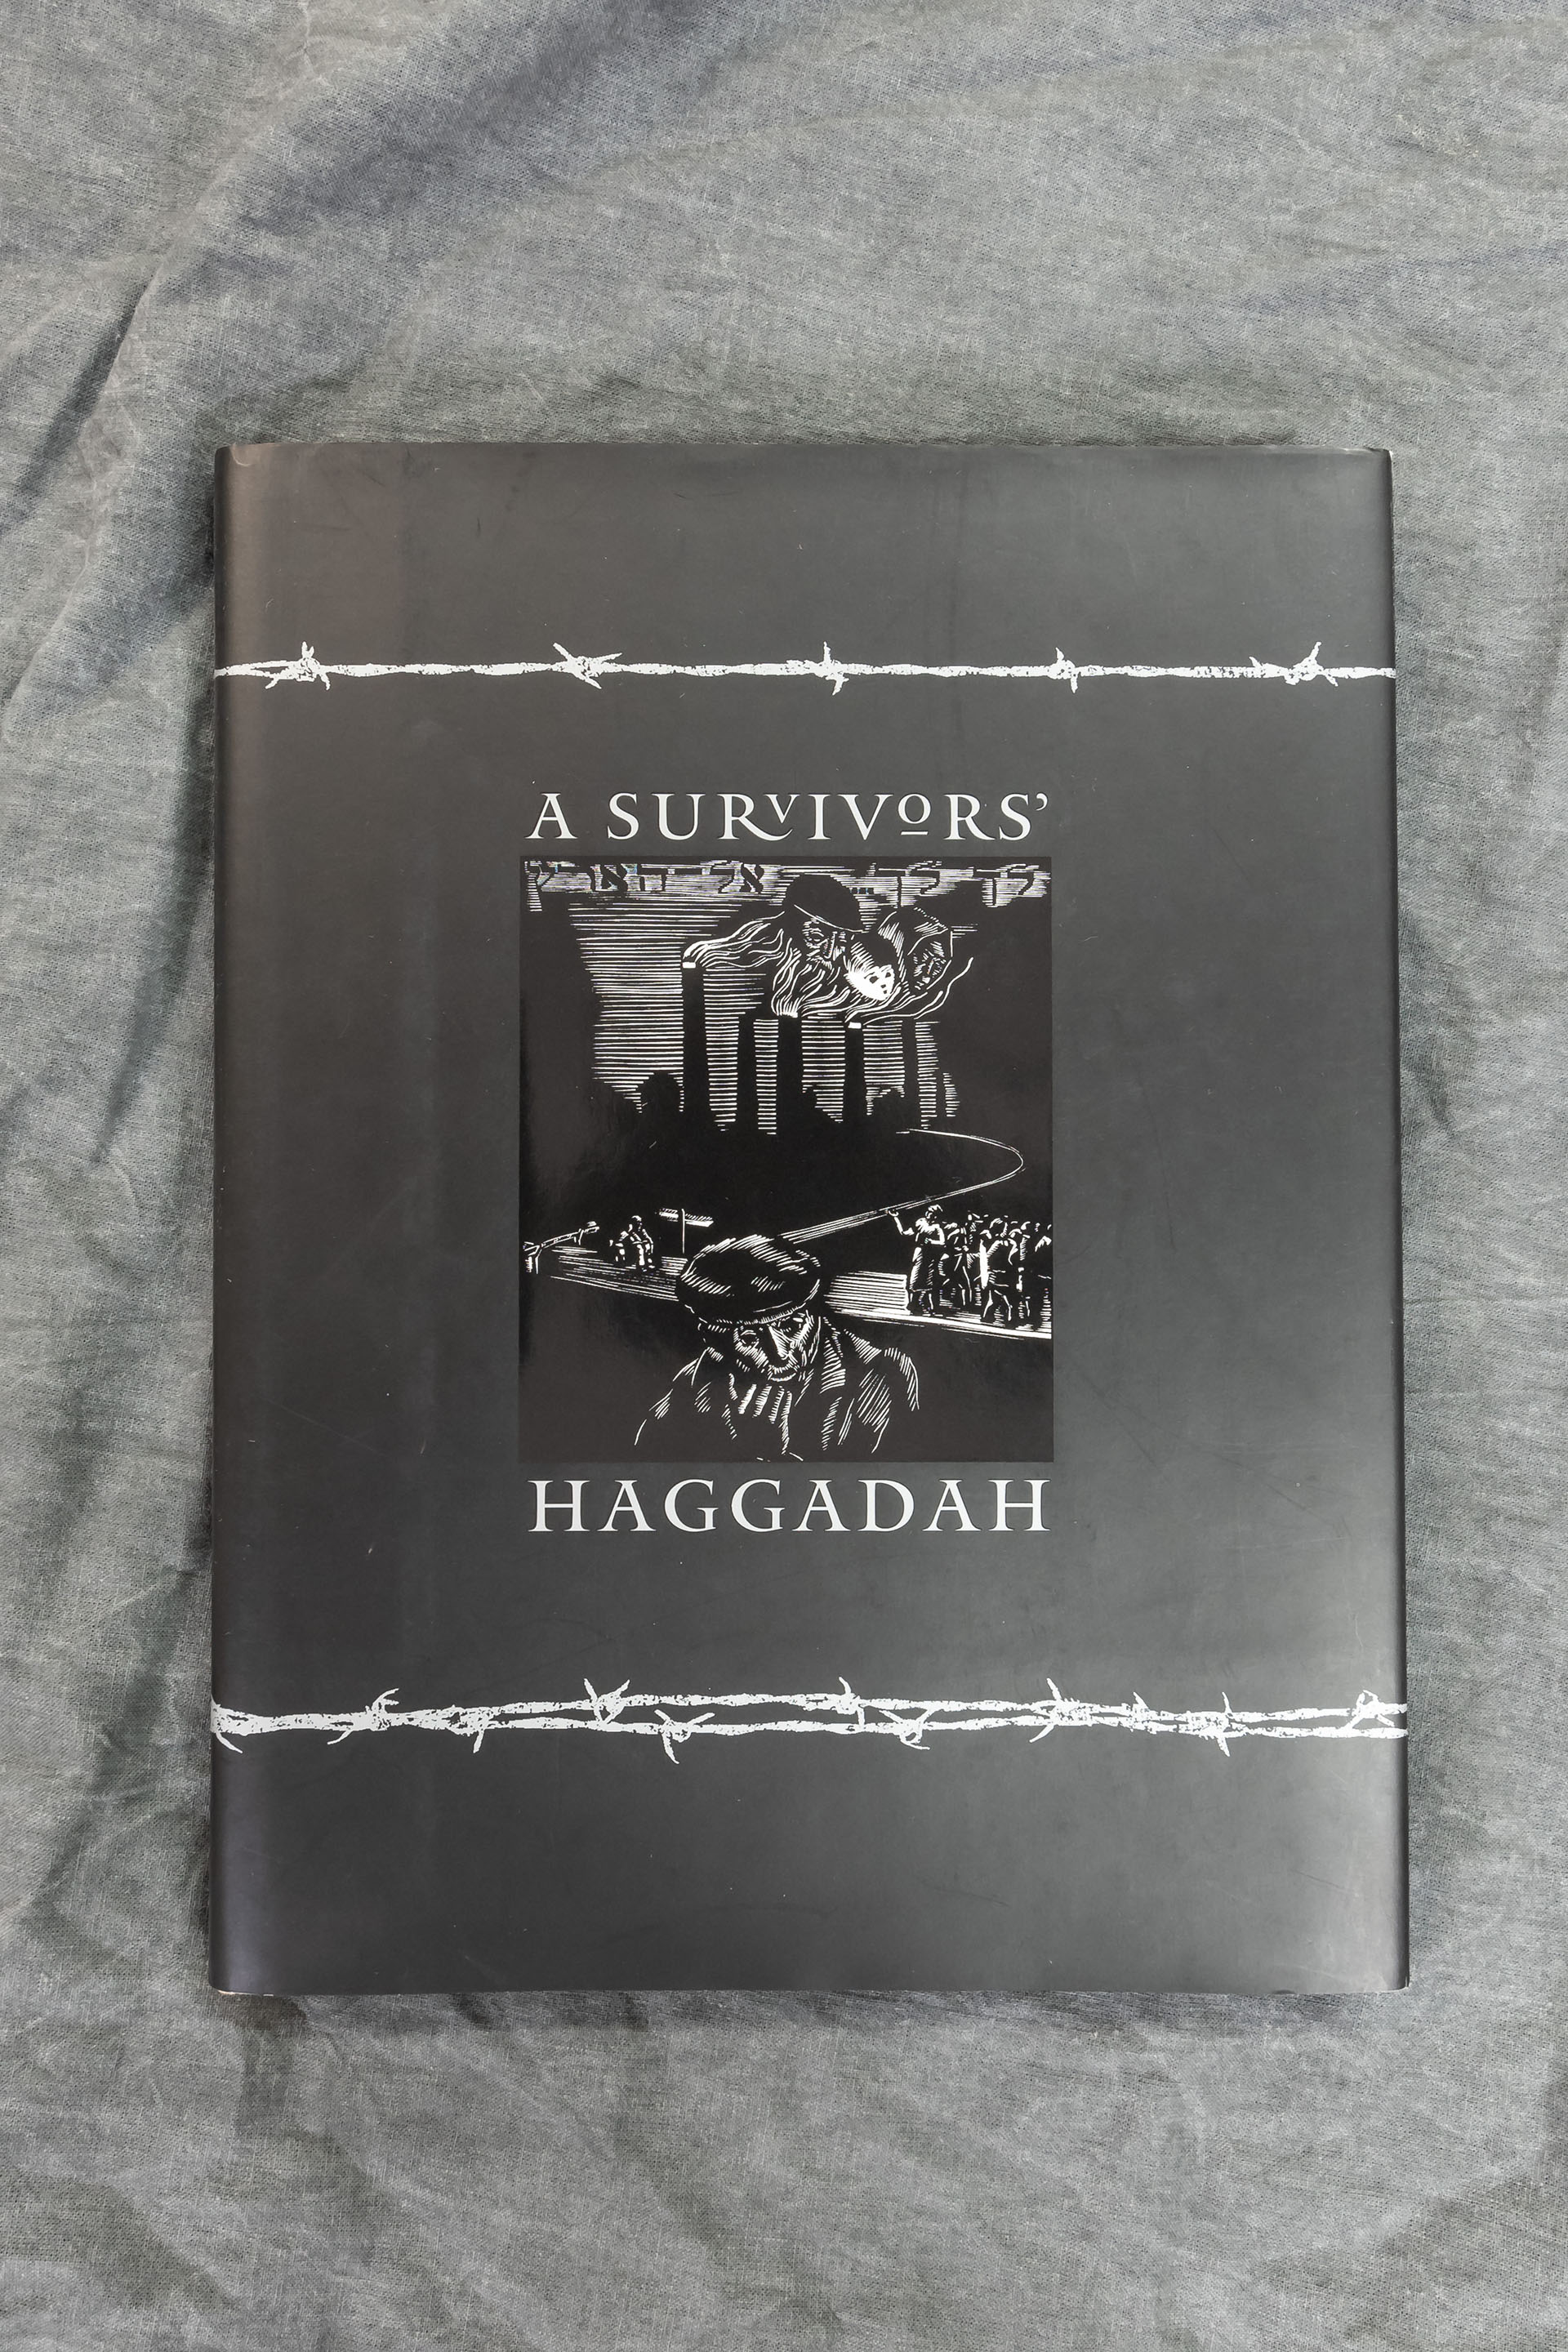 Haggadah book cover featuring barbed wire and black and white illustrations